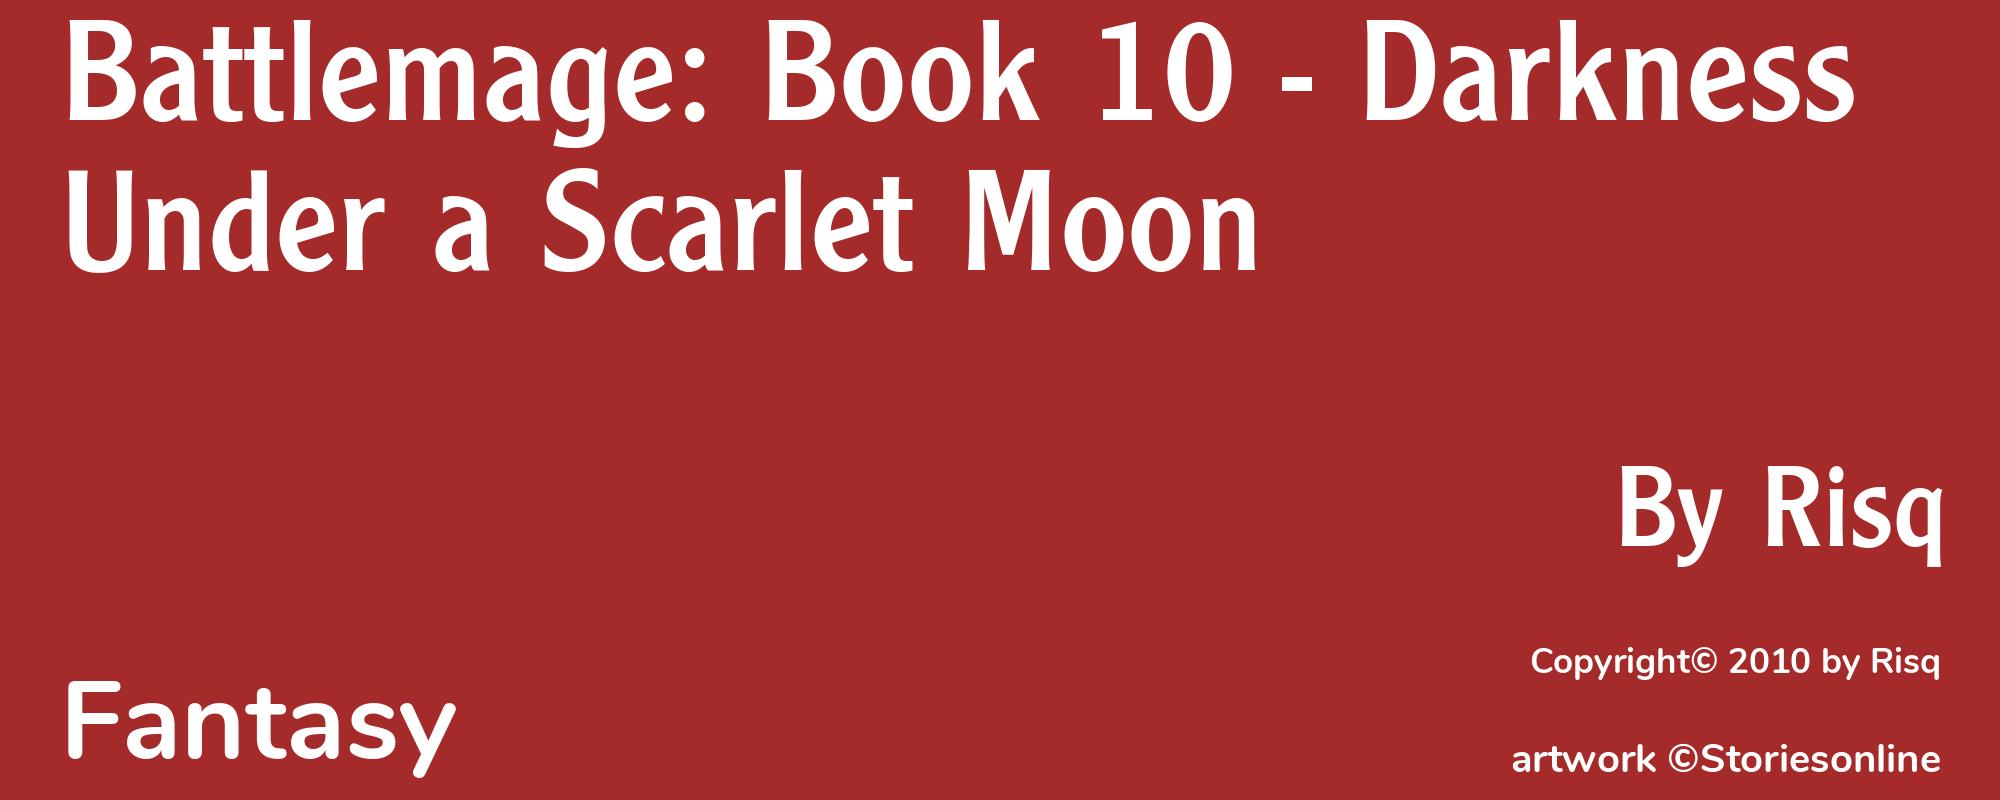 Battlemage: Book 10 - Darkness Under a Scarlet Moon - Cover